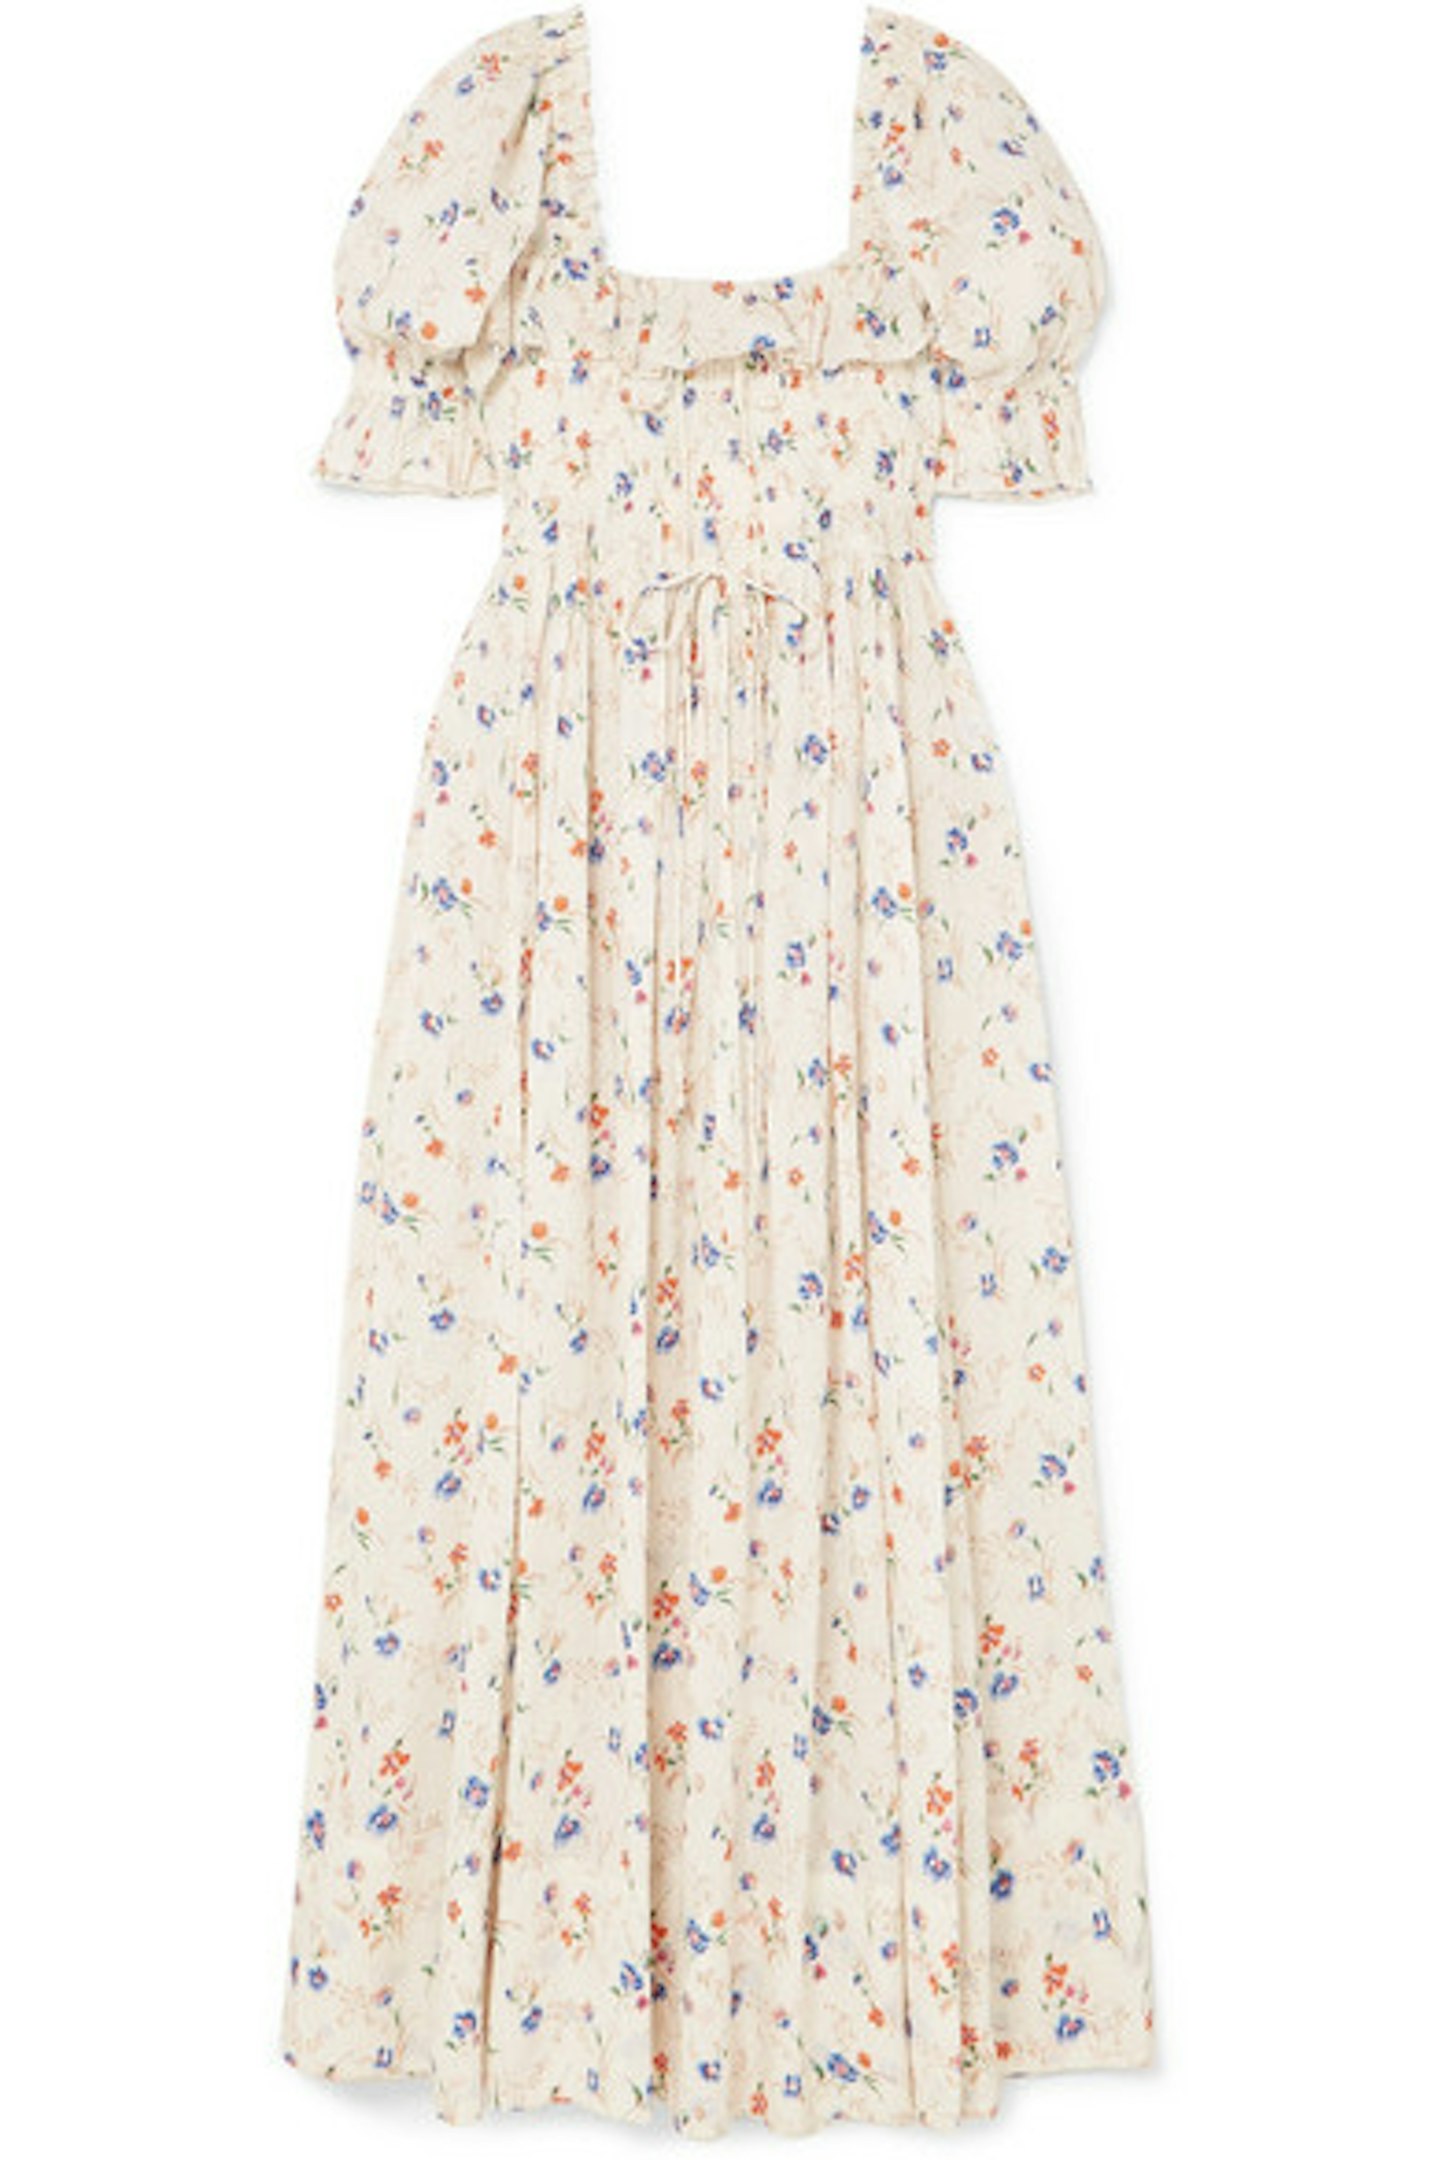 Sol Shirred Maxi Dress in White Floral Print, £330